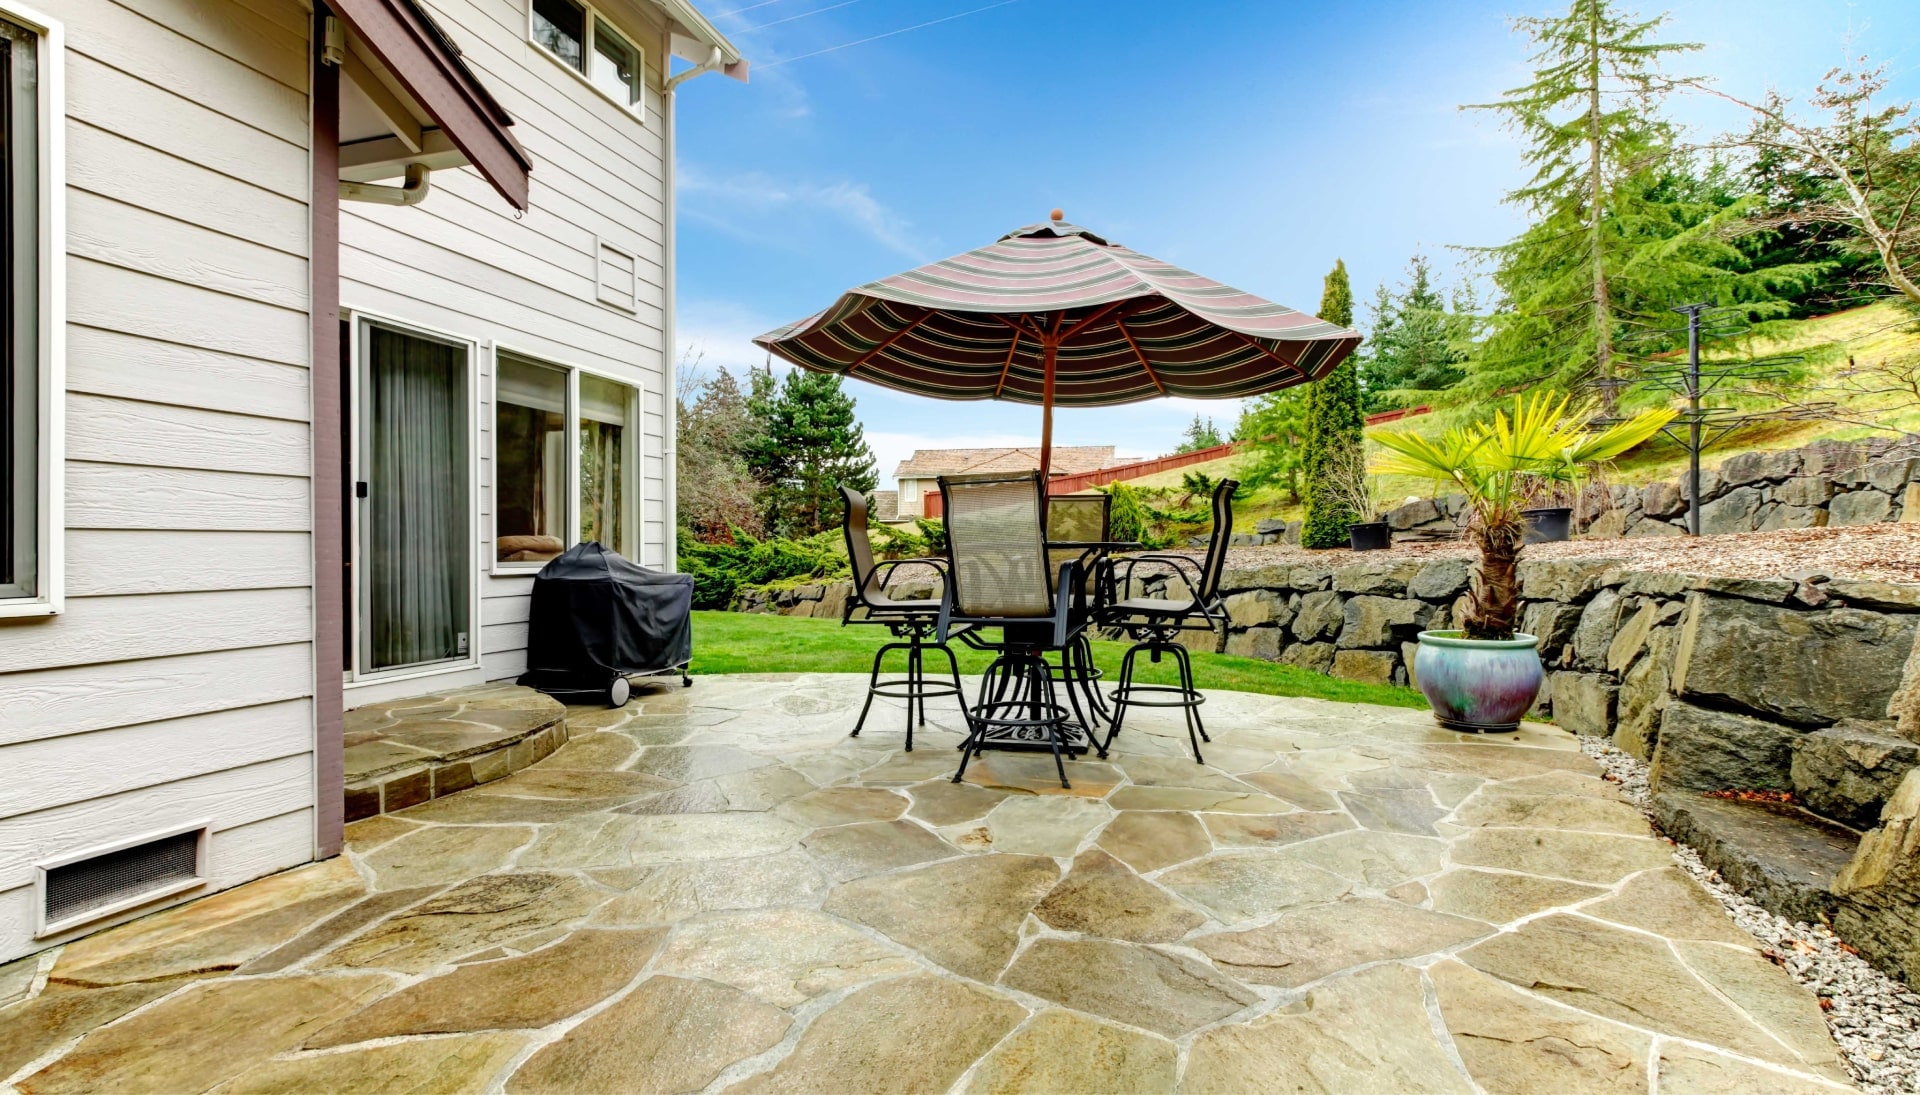 Create an Outdoor Oasis with Stunning Concrete Patio in Detroit, MI - Enjoy Beautifully Textured and Patterned Concrete Surfaces for Your Entertaining and Relaxation Needs.